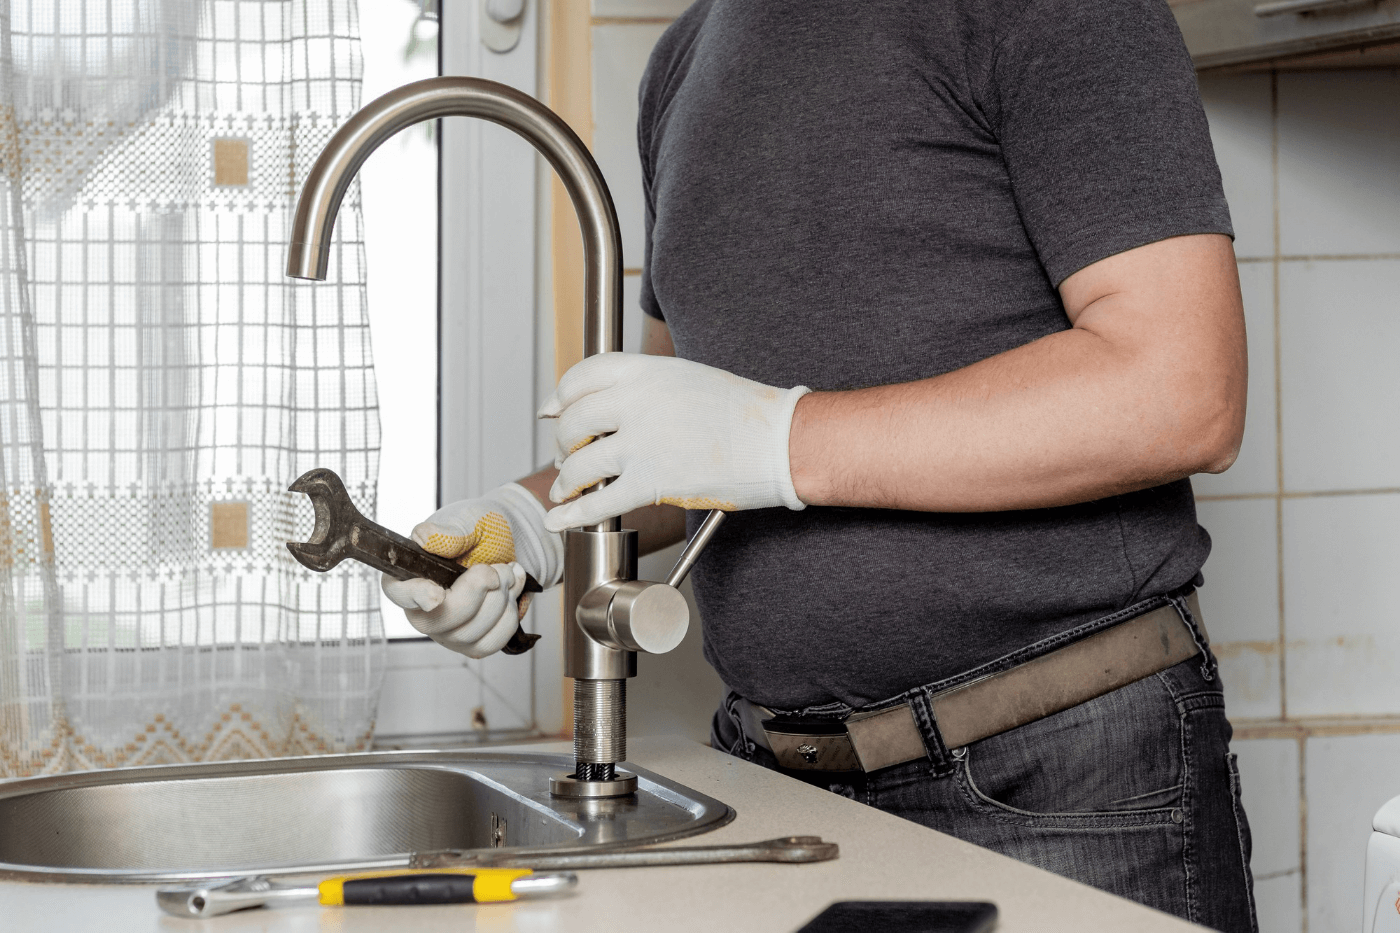 A plumber in the kitchen installs a new water tap.